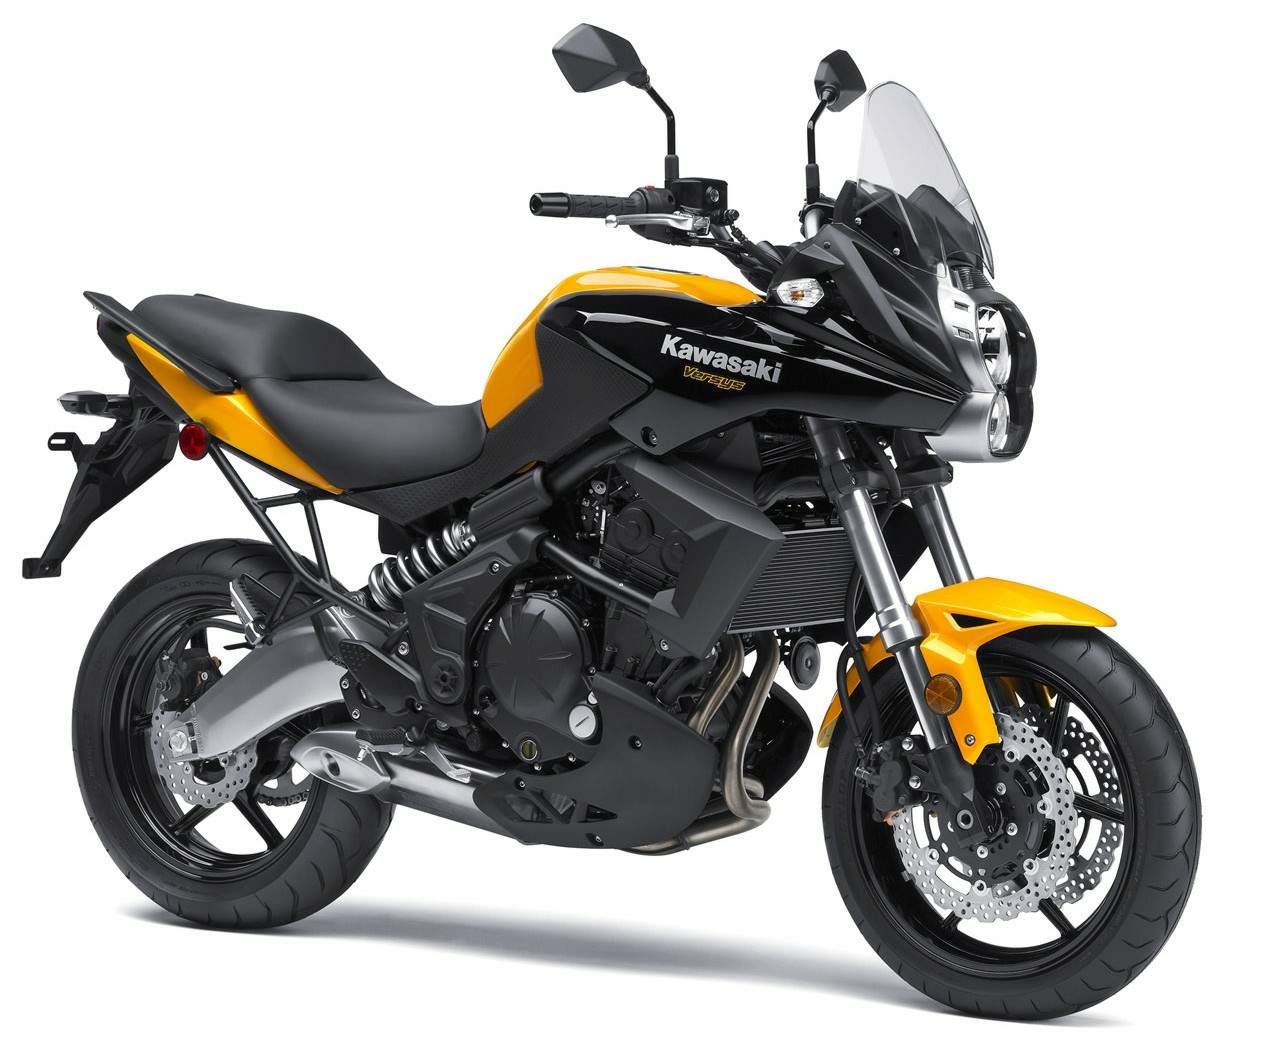 Kawasaki KLE 650 Versys technical specifications